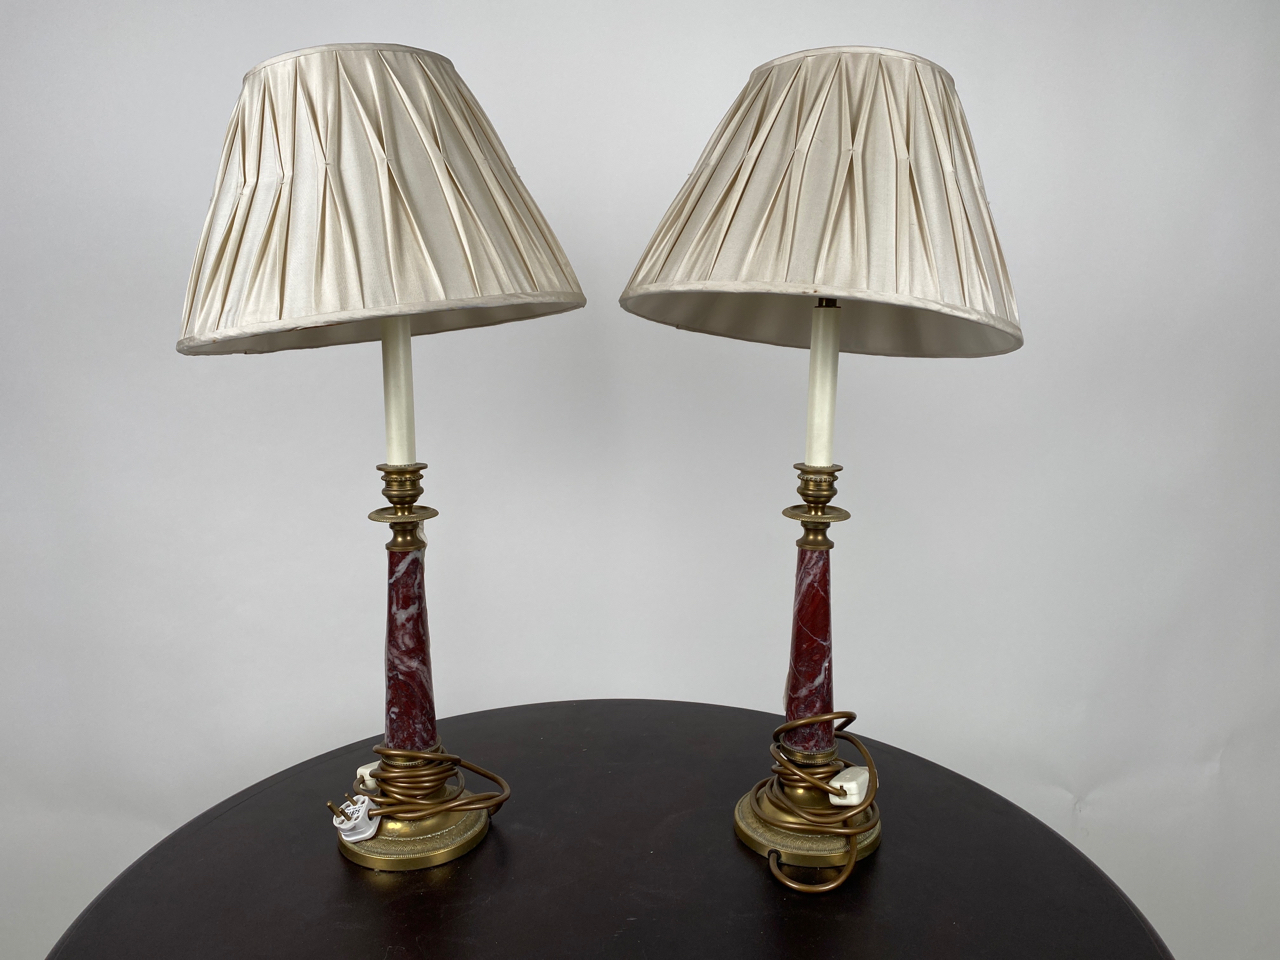 Trio of Brass Table Lamps